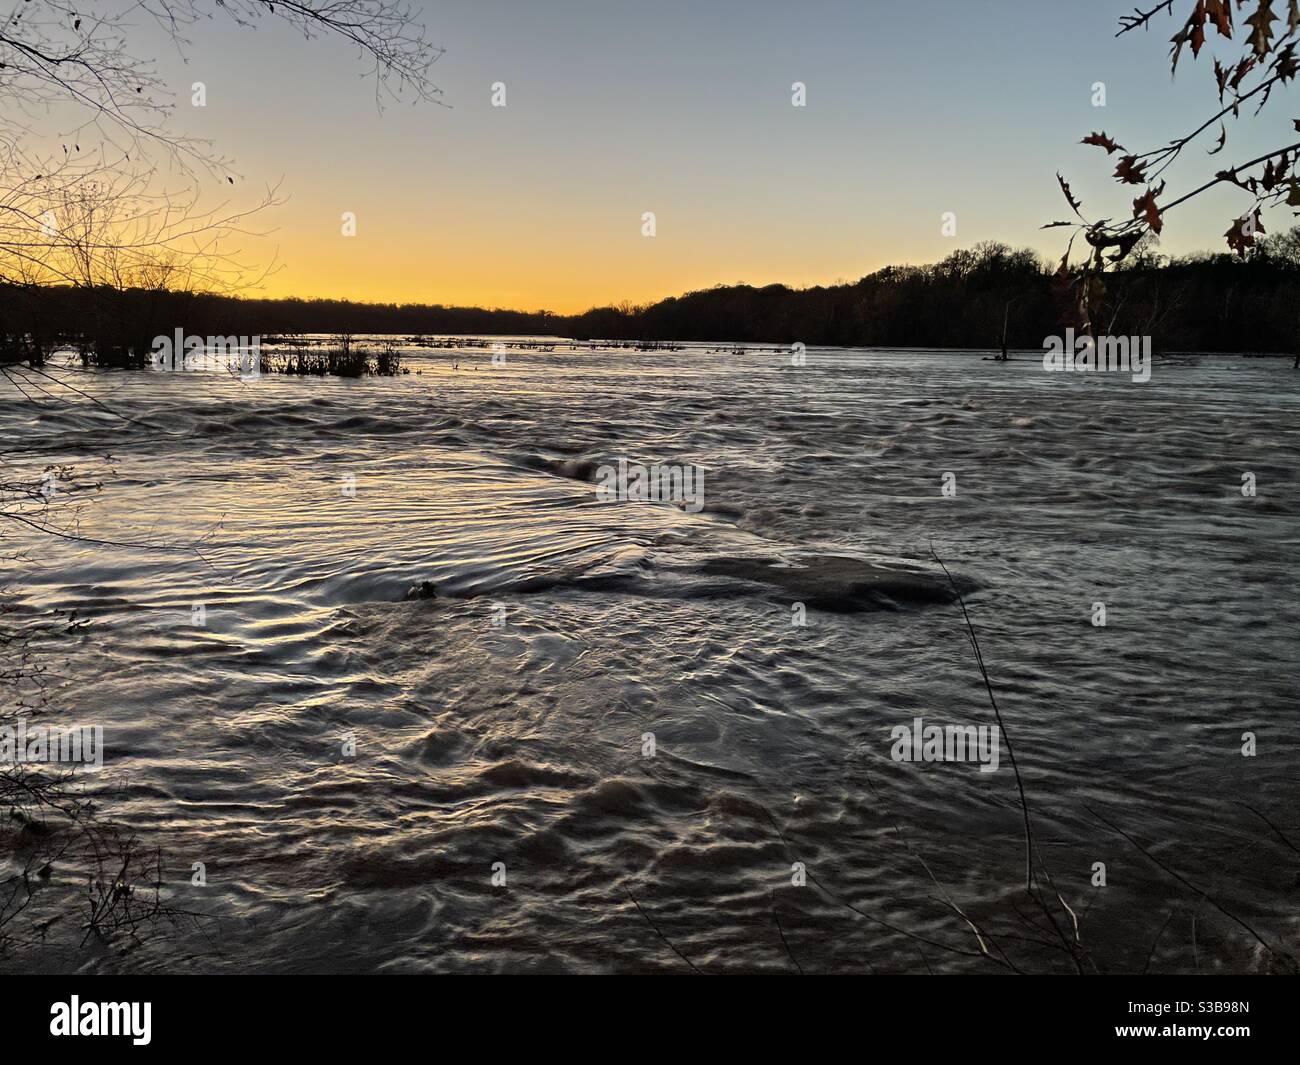 The James River at sunset. Stock Photo